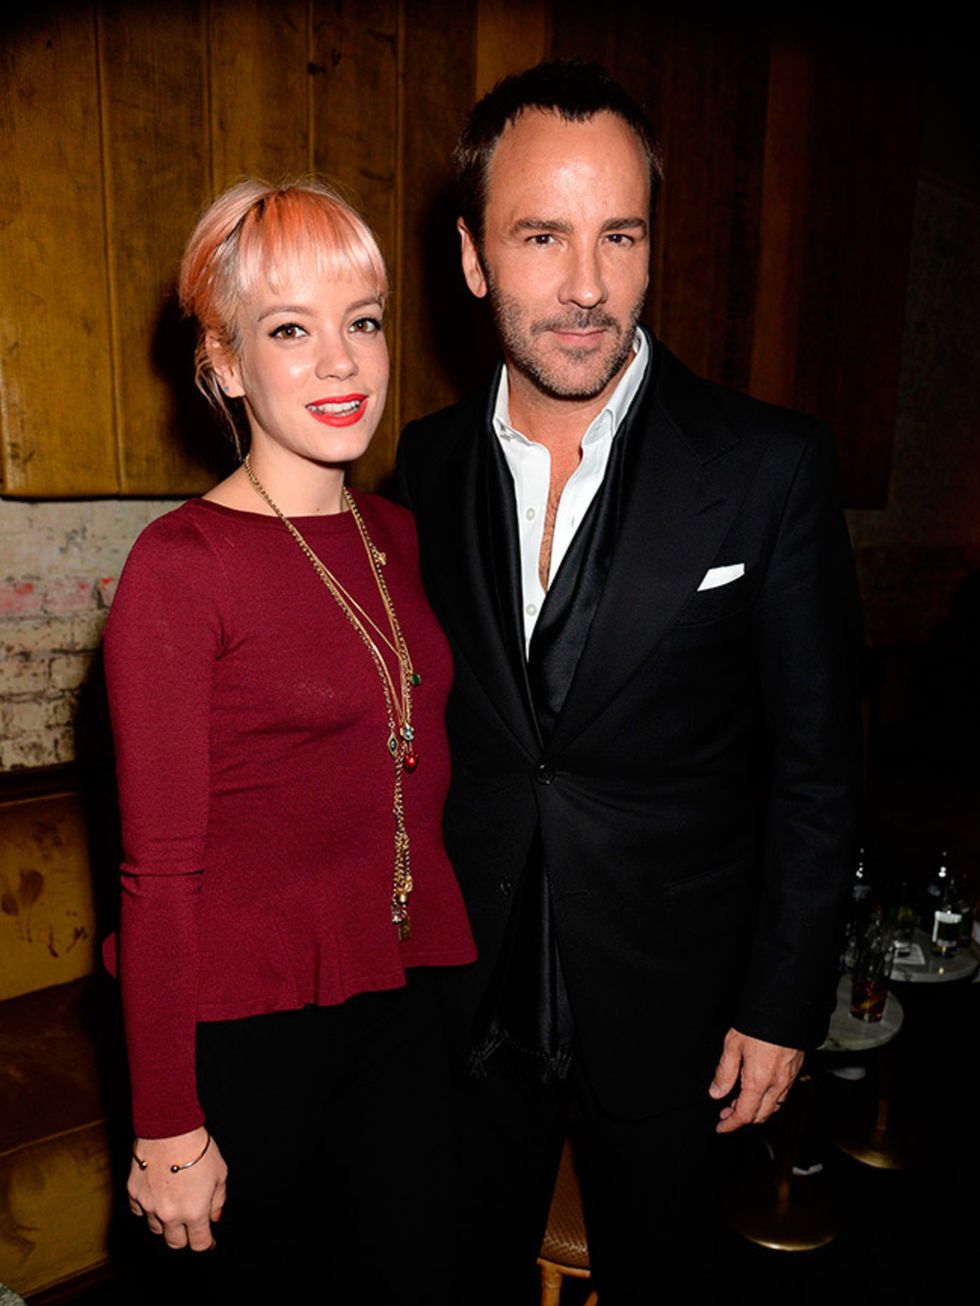 Tom Ford and Lily Allen attend the launch of Tom Ford's fragrance party during London Collections:Men, January 2015.